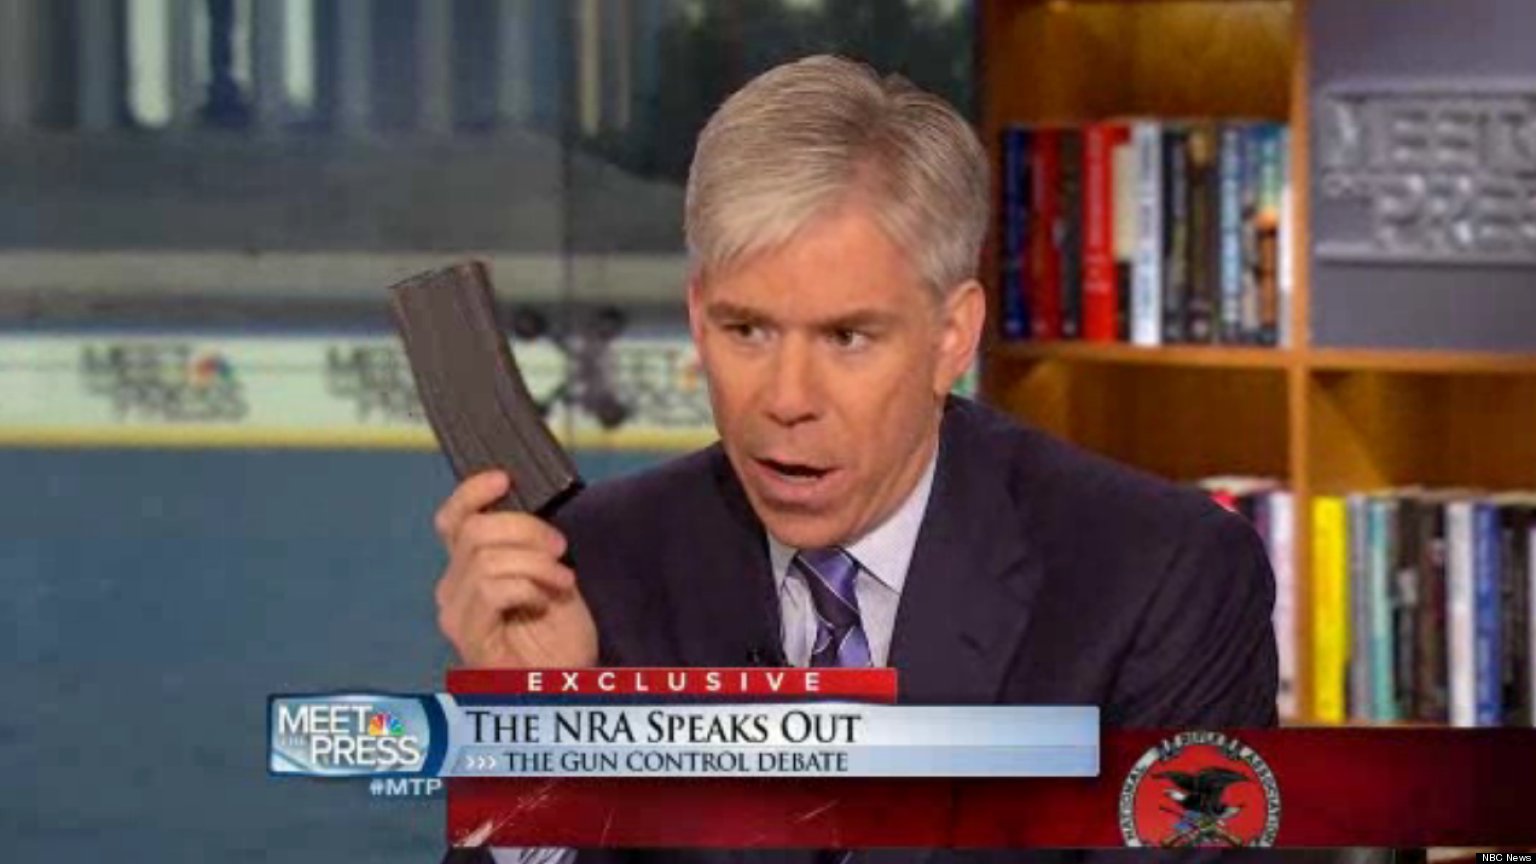 David Gregory on Meet The Press